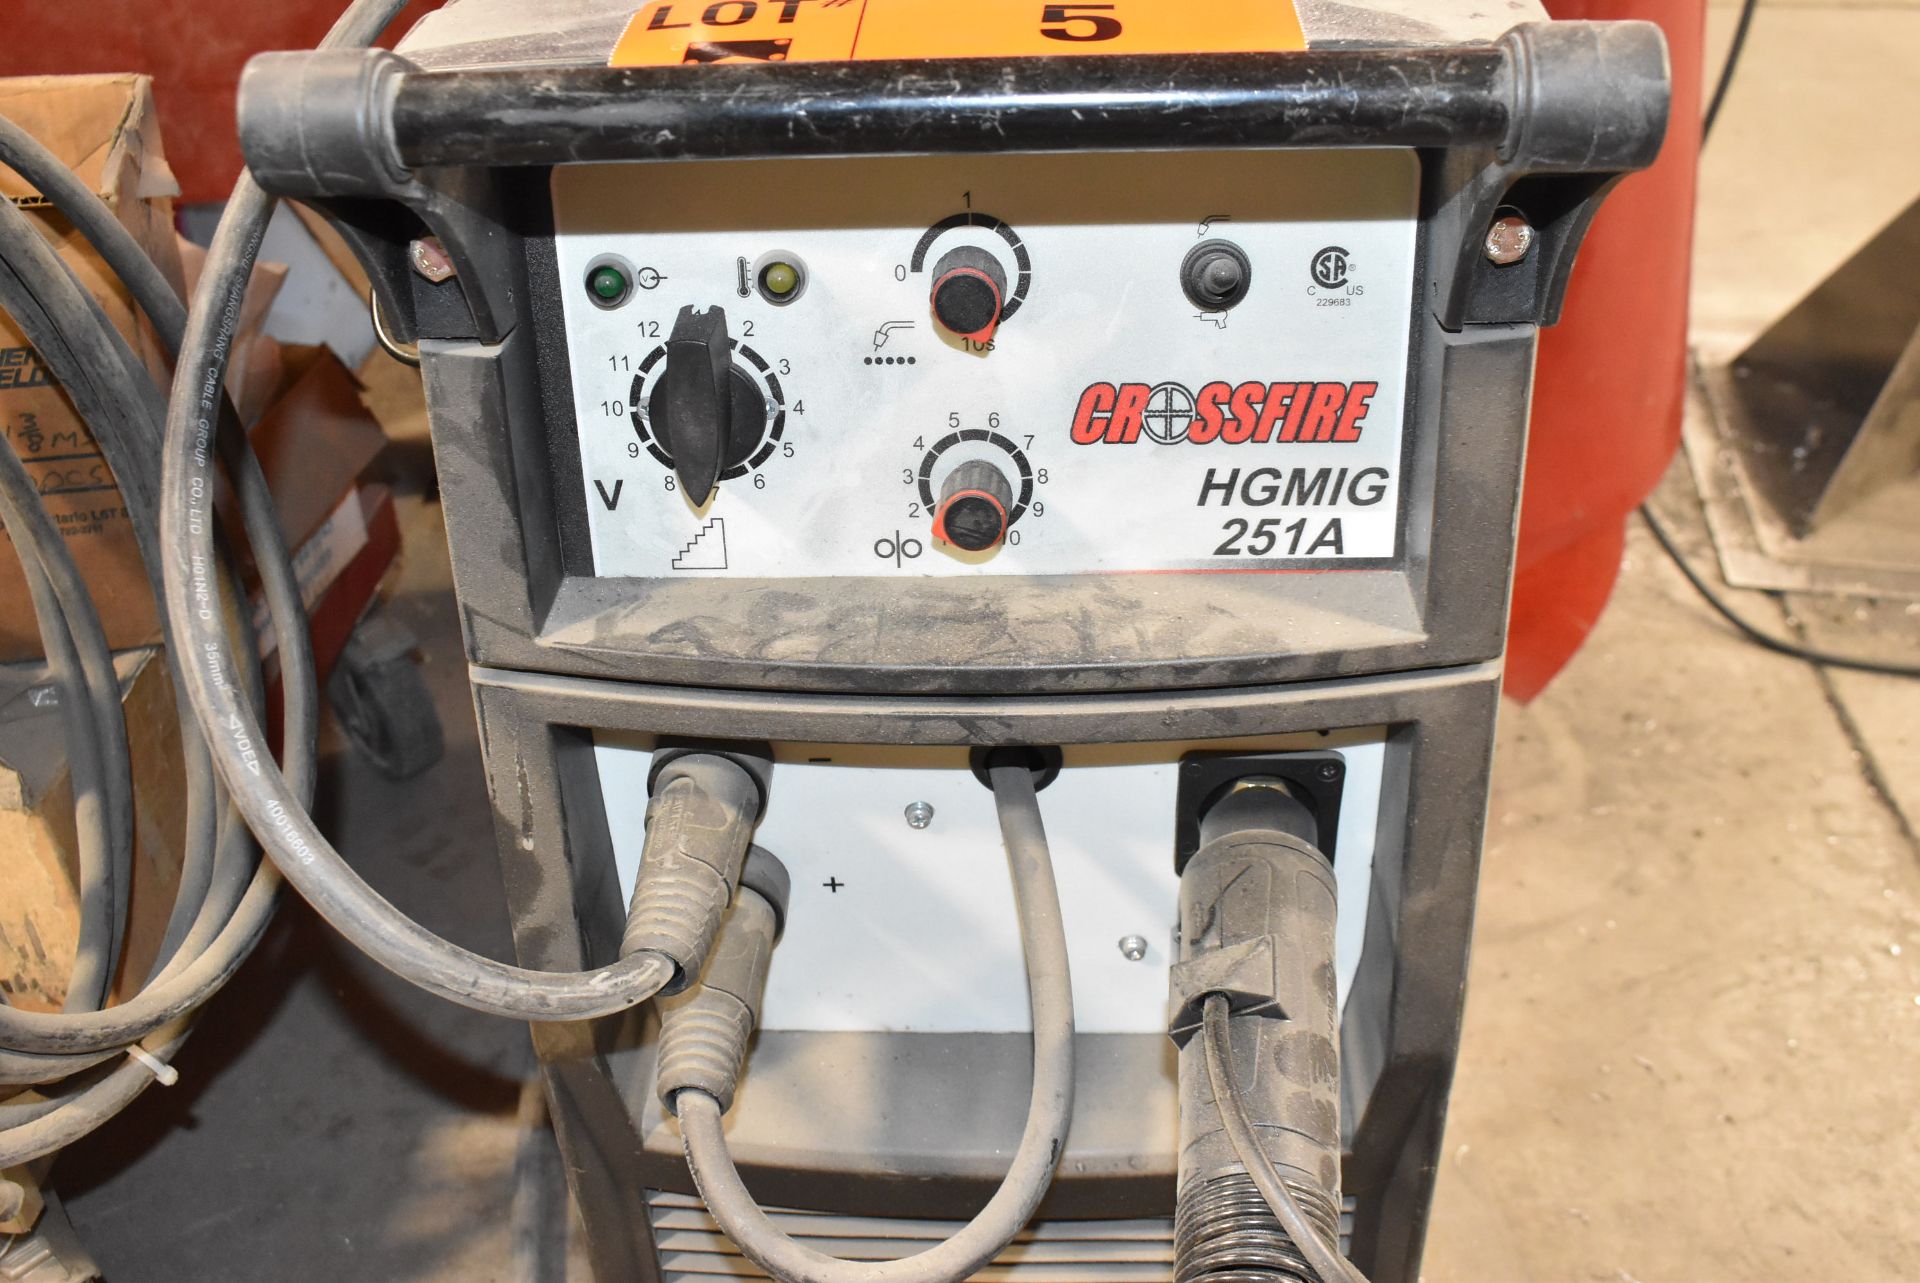 CROSSFIRE HGMIG 251A MIG WELDER WITH CABLES AND GUN, S/N 20081320292 [RIGGING FOR FOR LOT #5 - $25 - Image 2 of 5